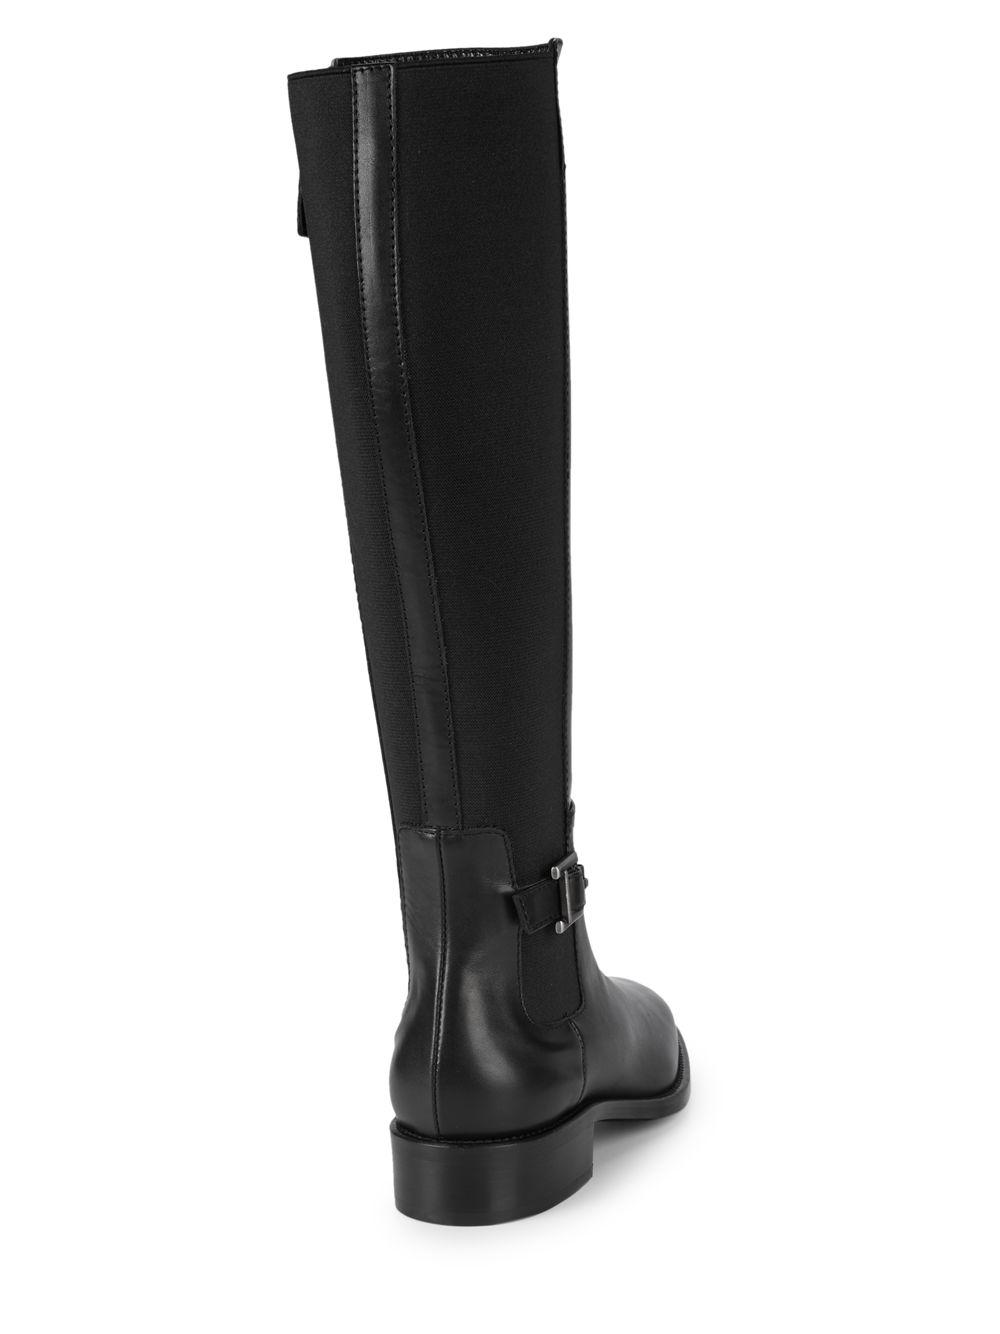 Aquatalia Natalee Leather Knee-high Riding Boots in Black - Lyst